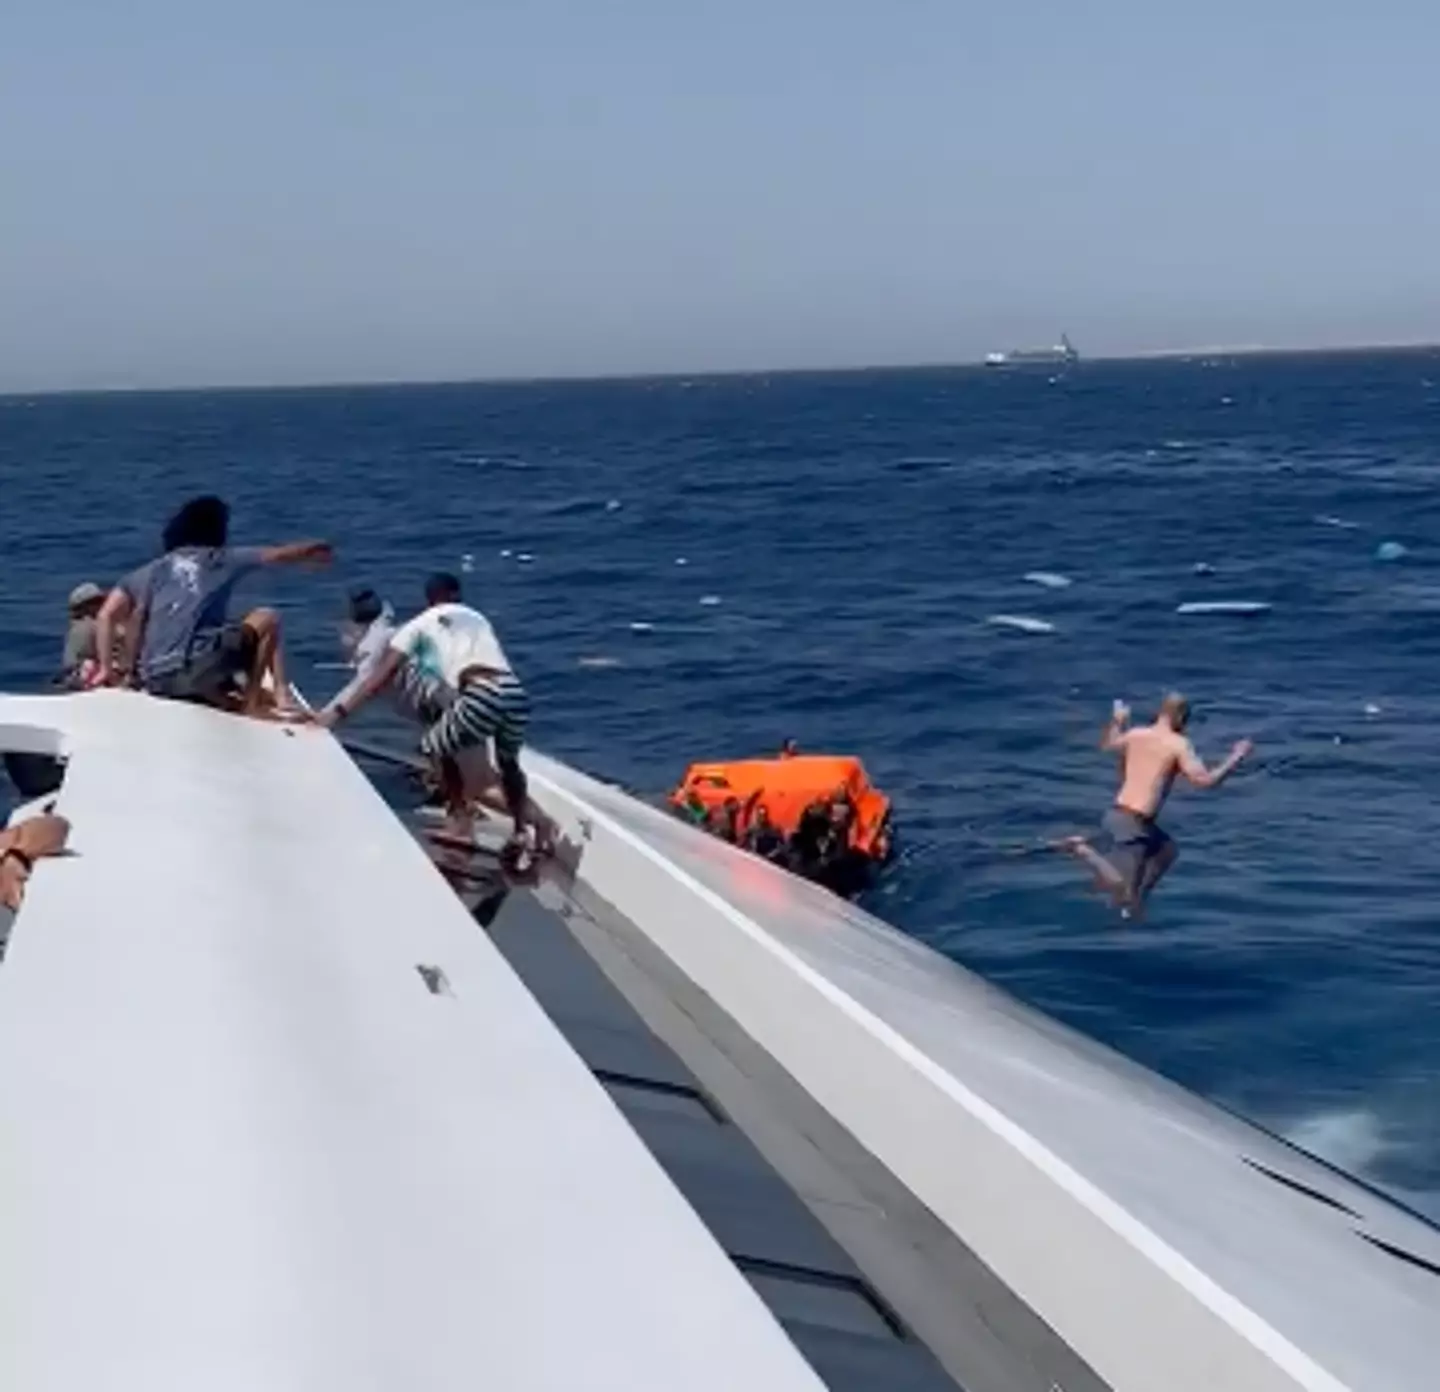 Passengers jumped from the boat to try and survive.